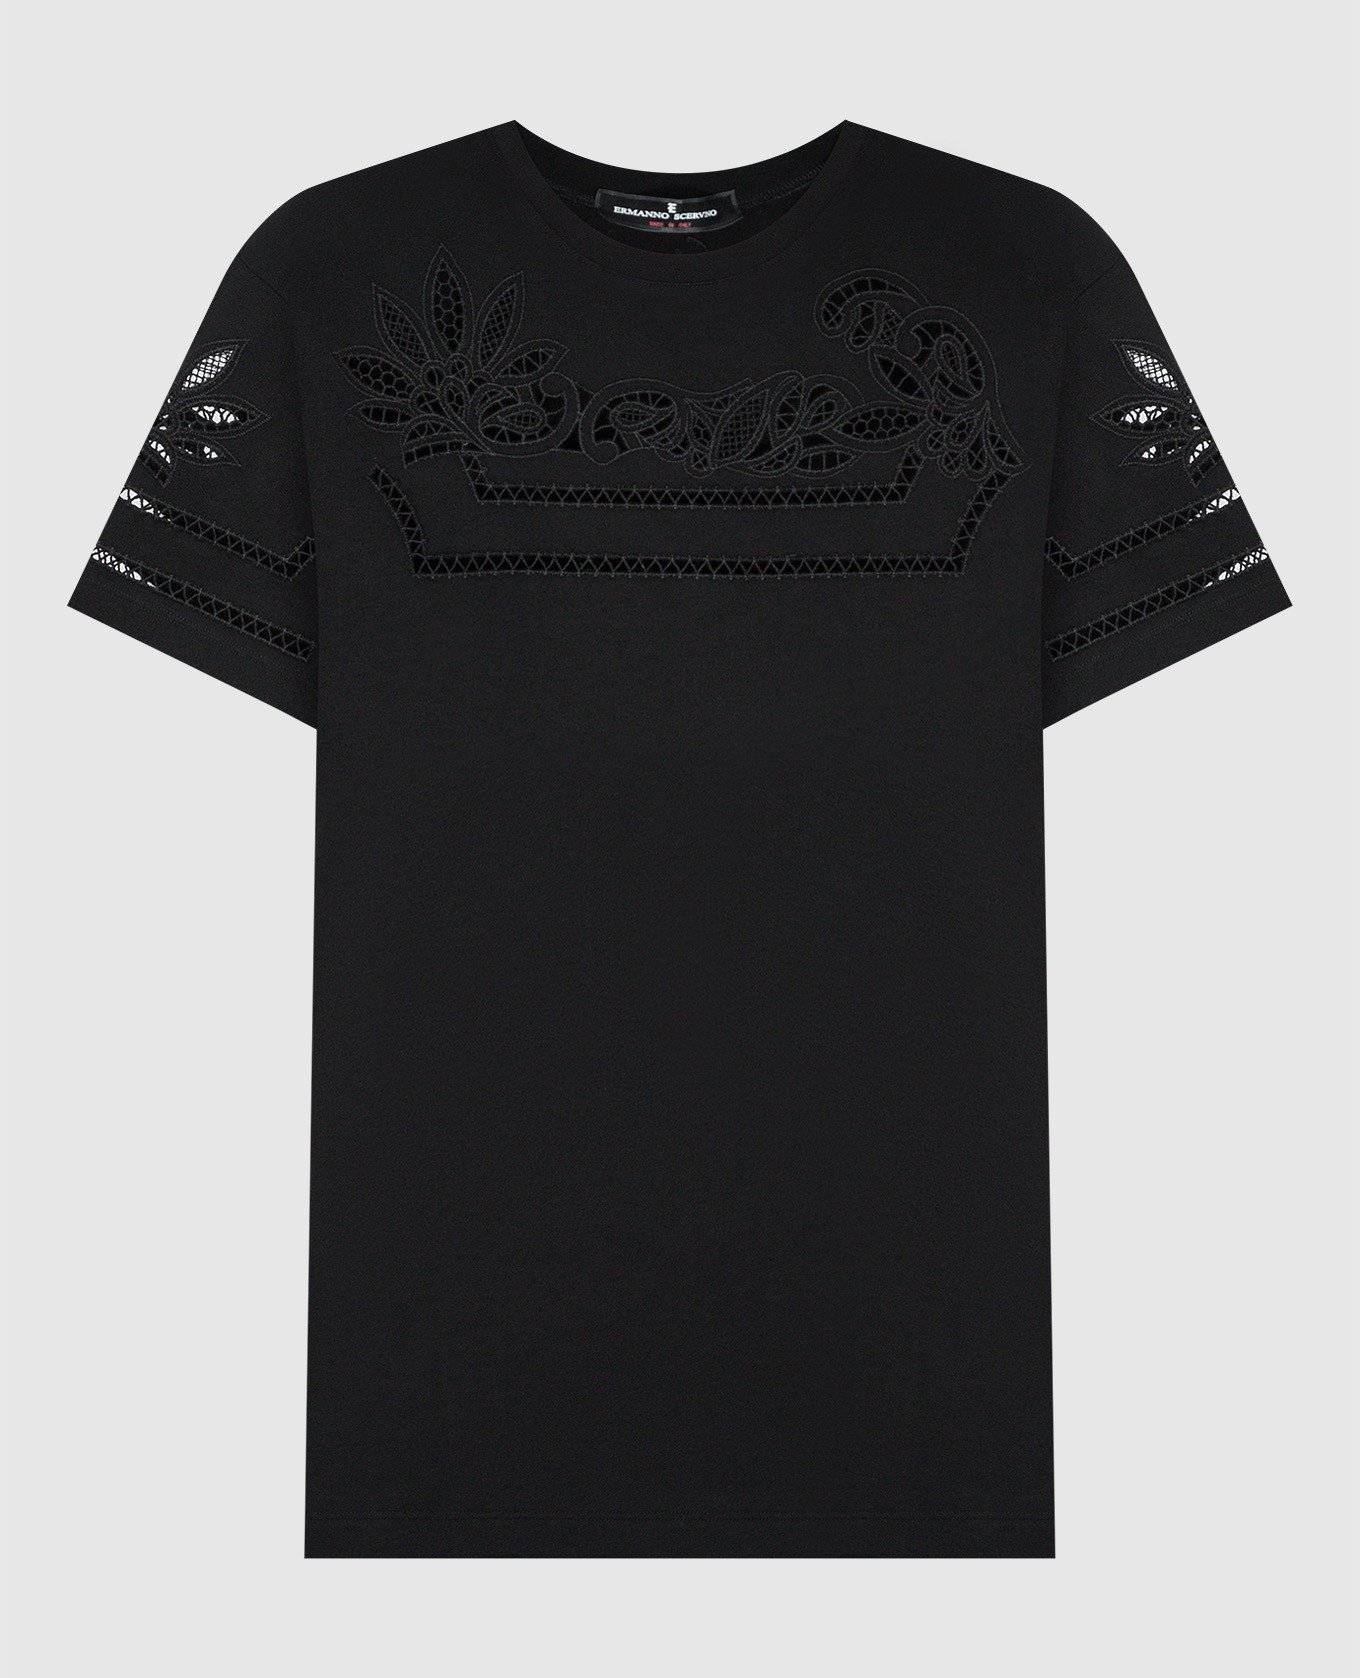 Black t-shirt with lace